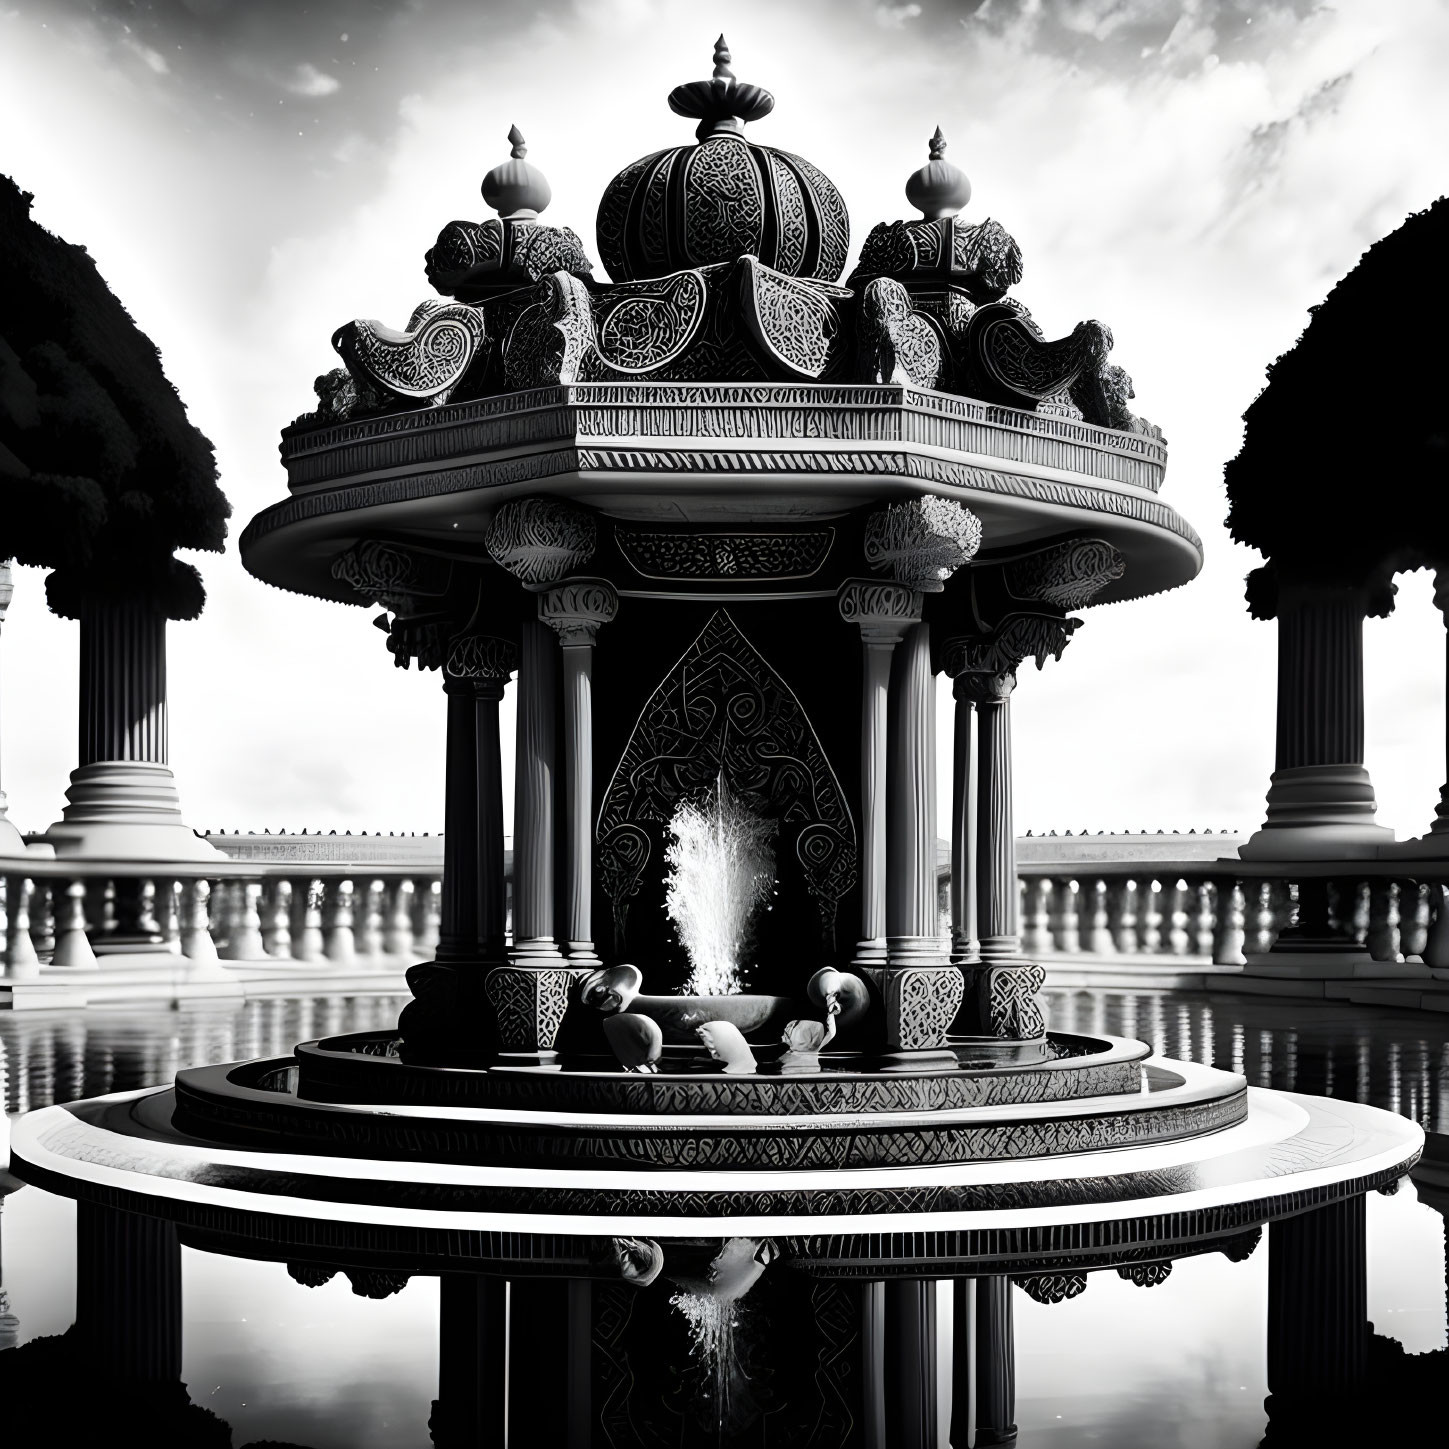 Ornate Black-and-White Pavilion with Domes, Carvings, Fountain, Columns,